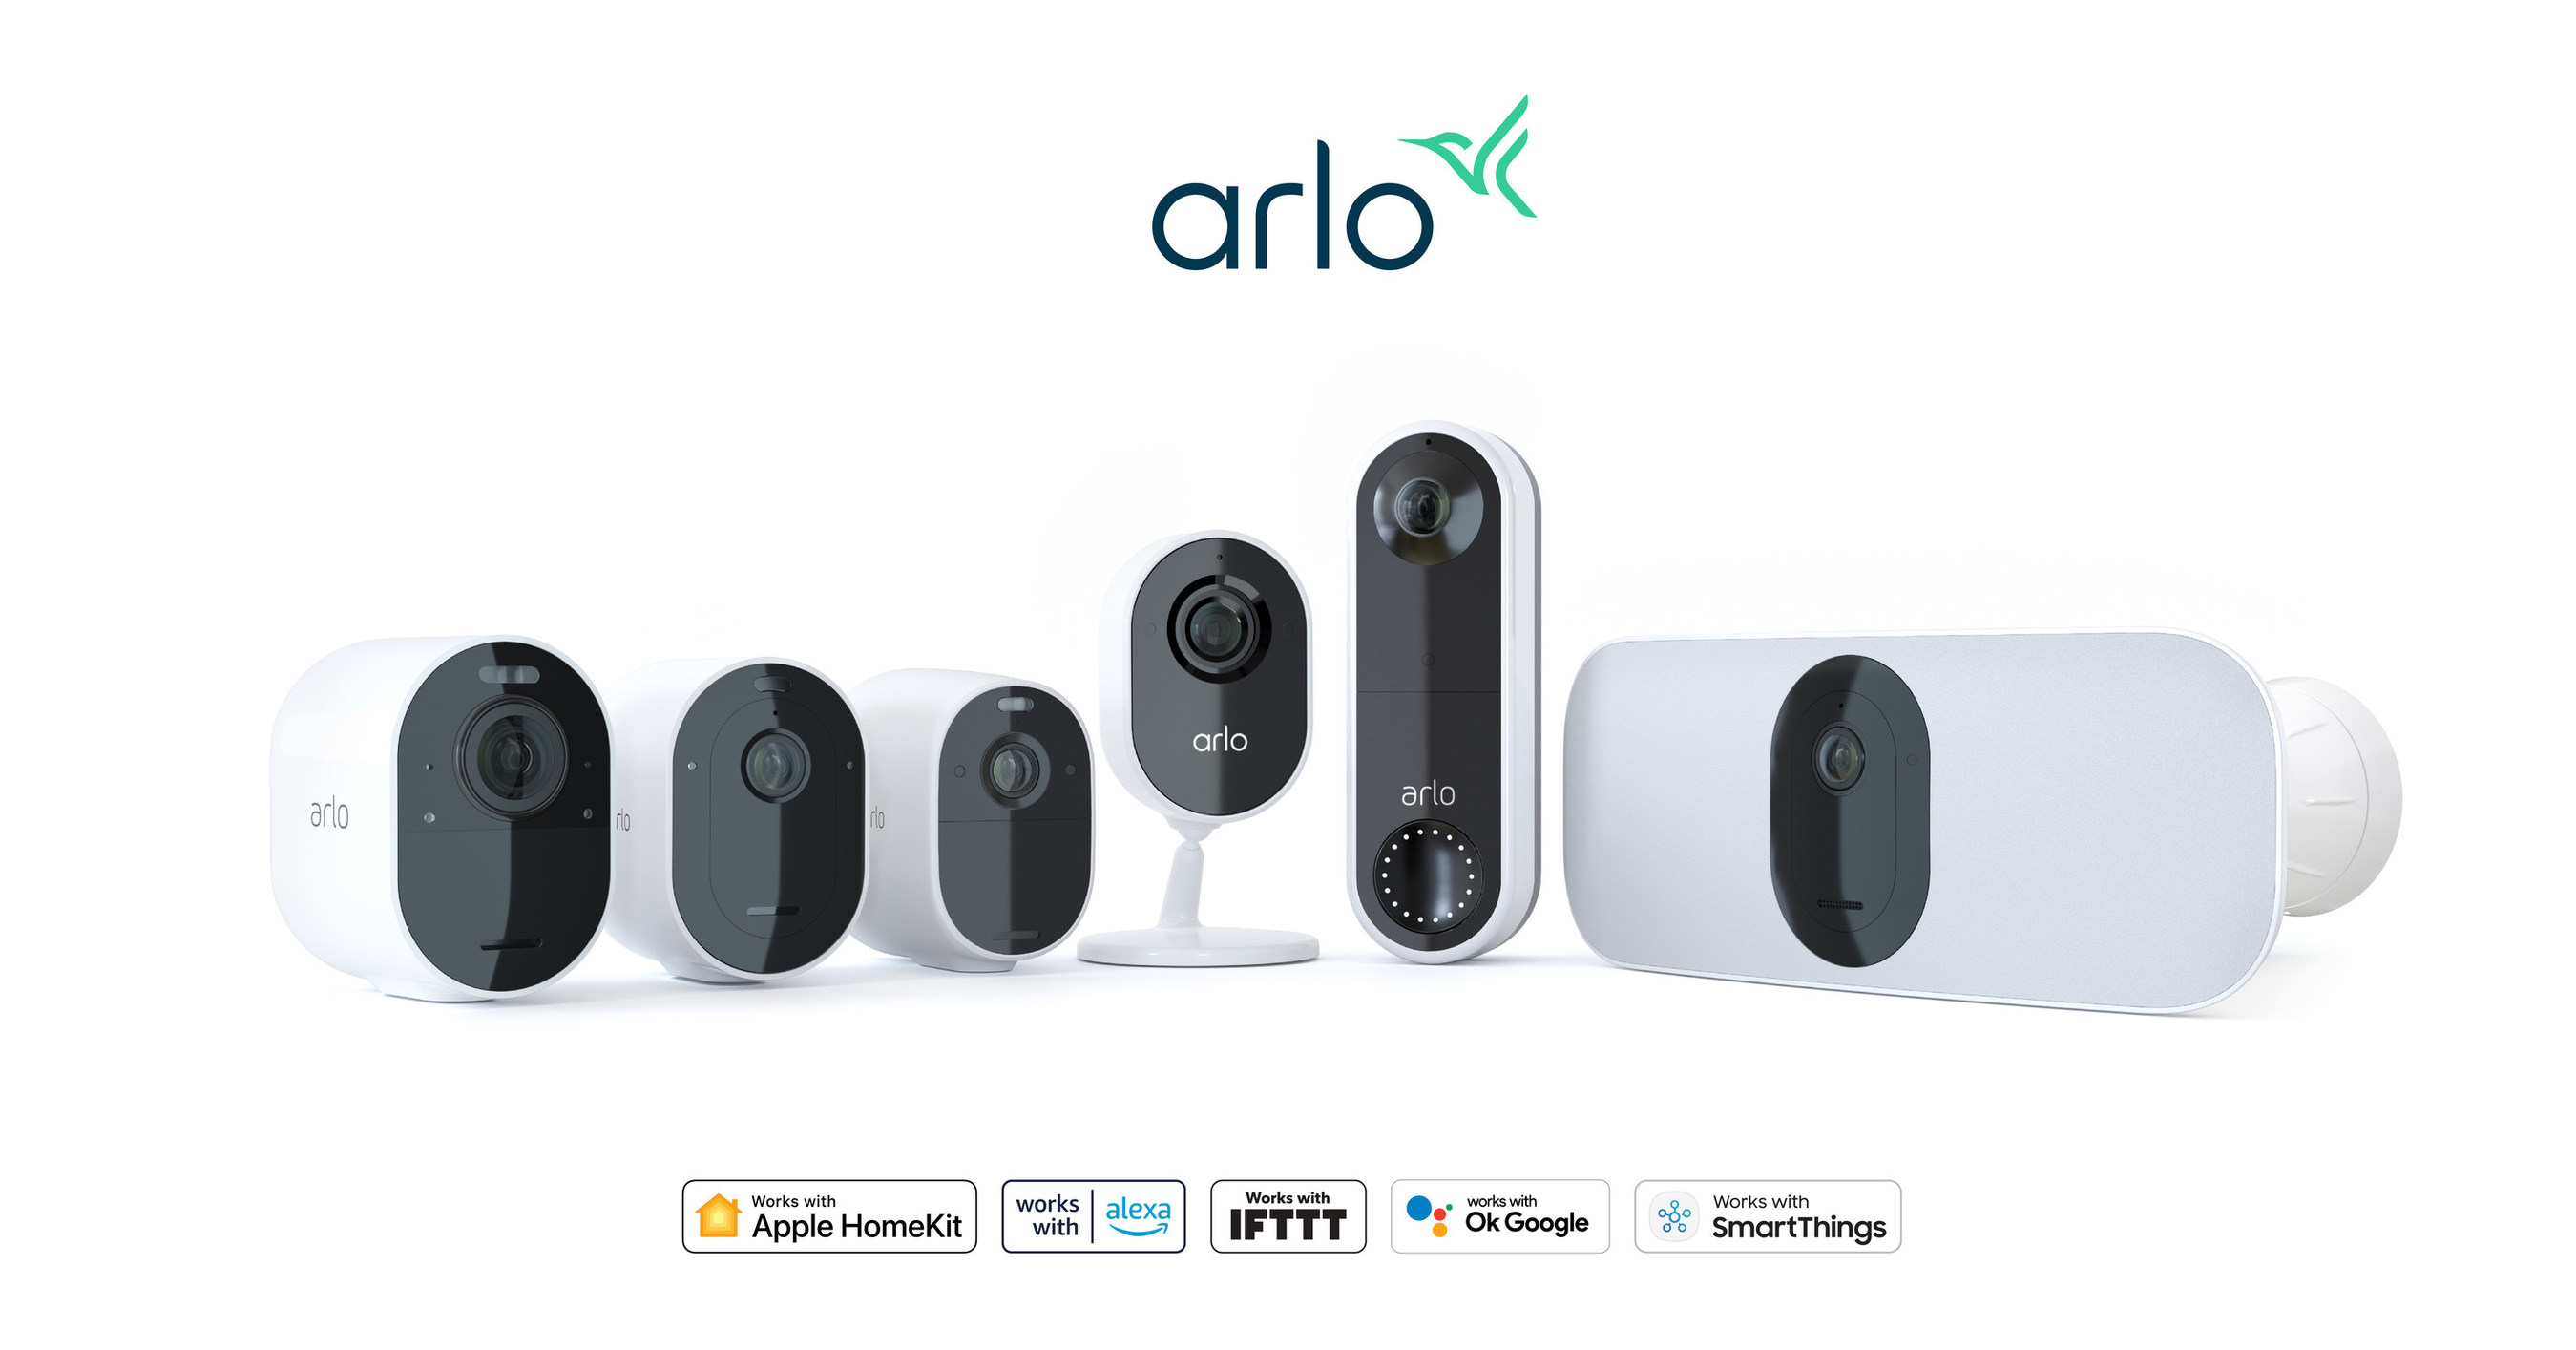 fly jorden igen Arlo Offers Comprehensive Third-Party Compatibility With Amazon, Apple,  Google, Samsung, And Others For Seamless Smart Home Security Experience